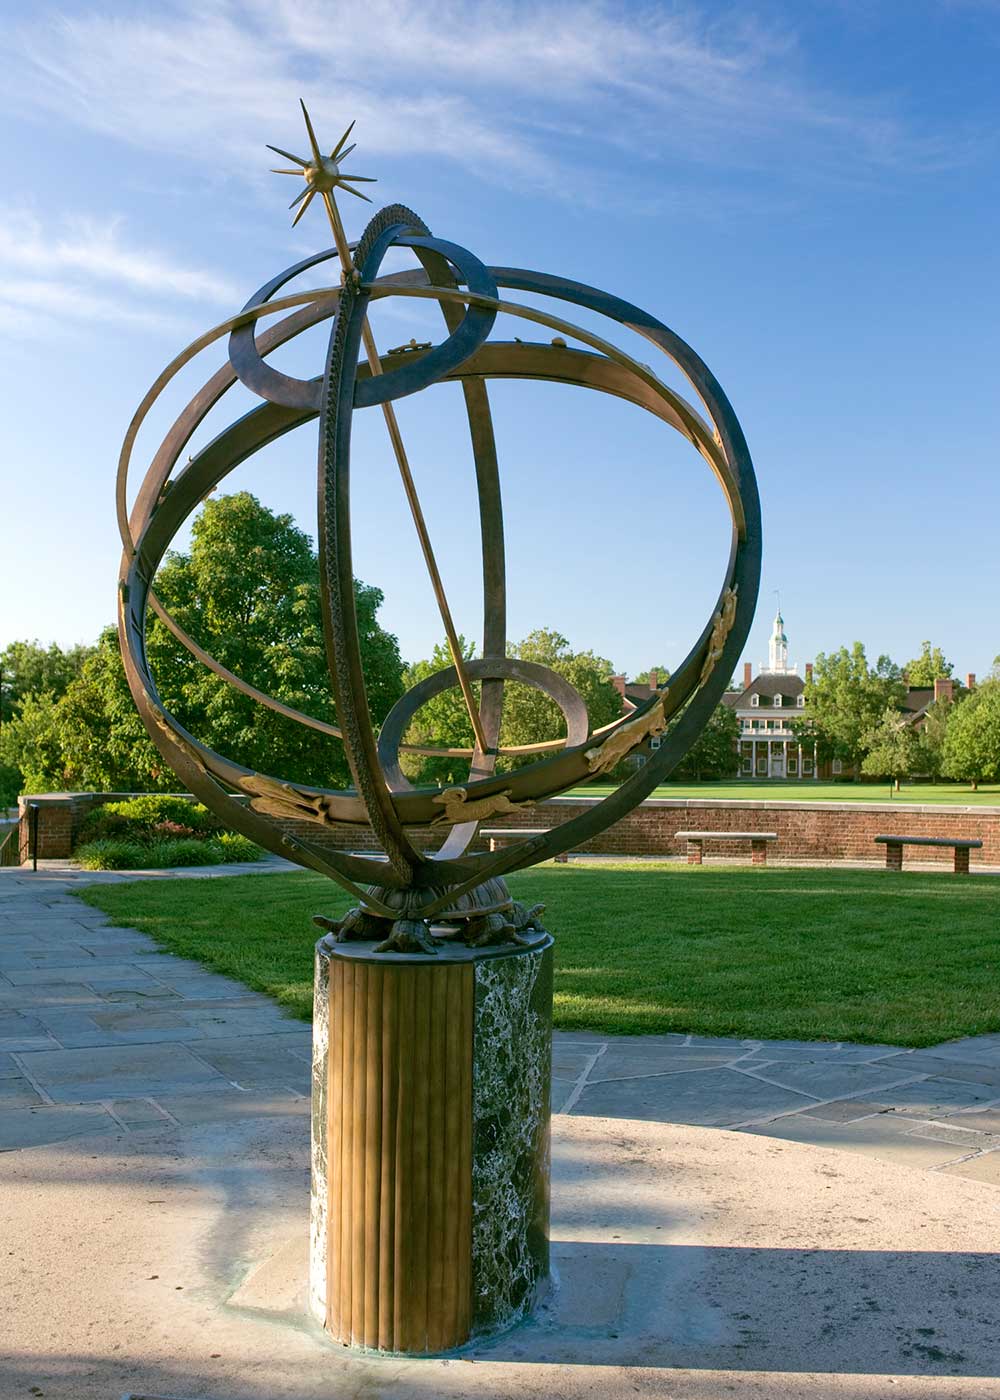 The sundial in view of McCracken Hall in the distance on a sunny day